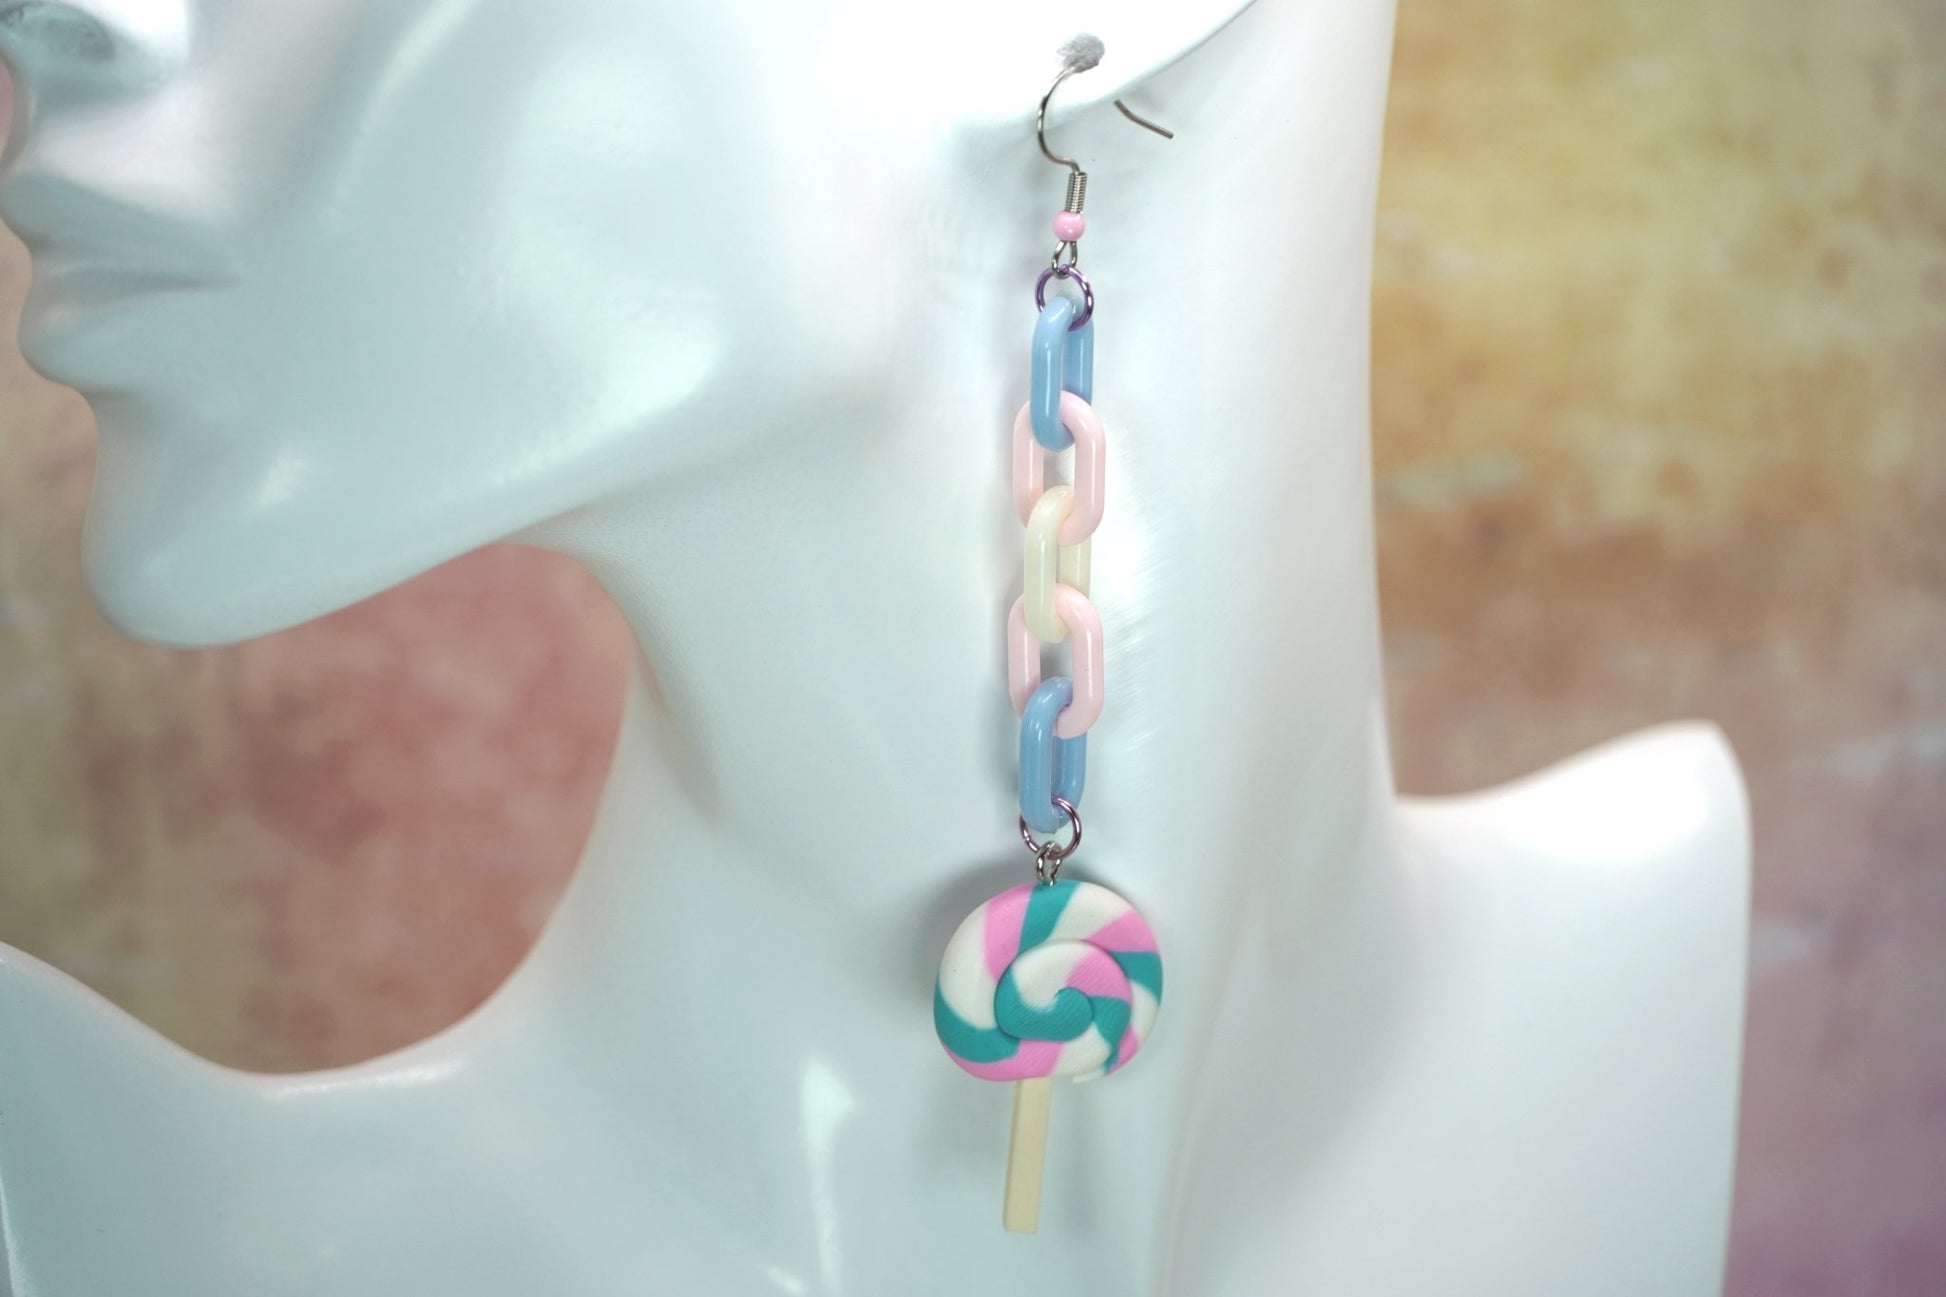 Trans Flag Colored Lollipop Earrings with Pastel Chains, Trans Pride Earrings, LGBTQ Pride Month - Dekowaii Jewelry Company